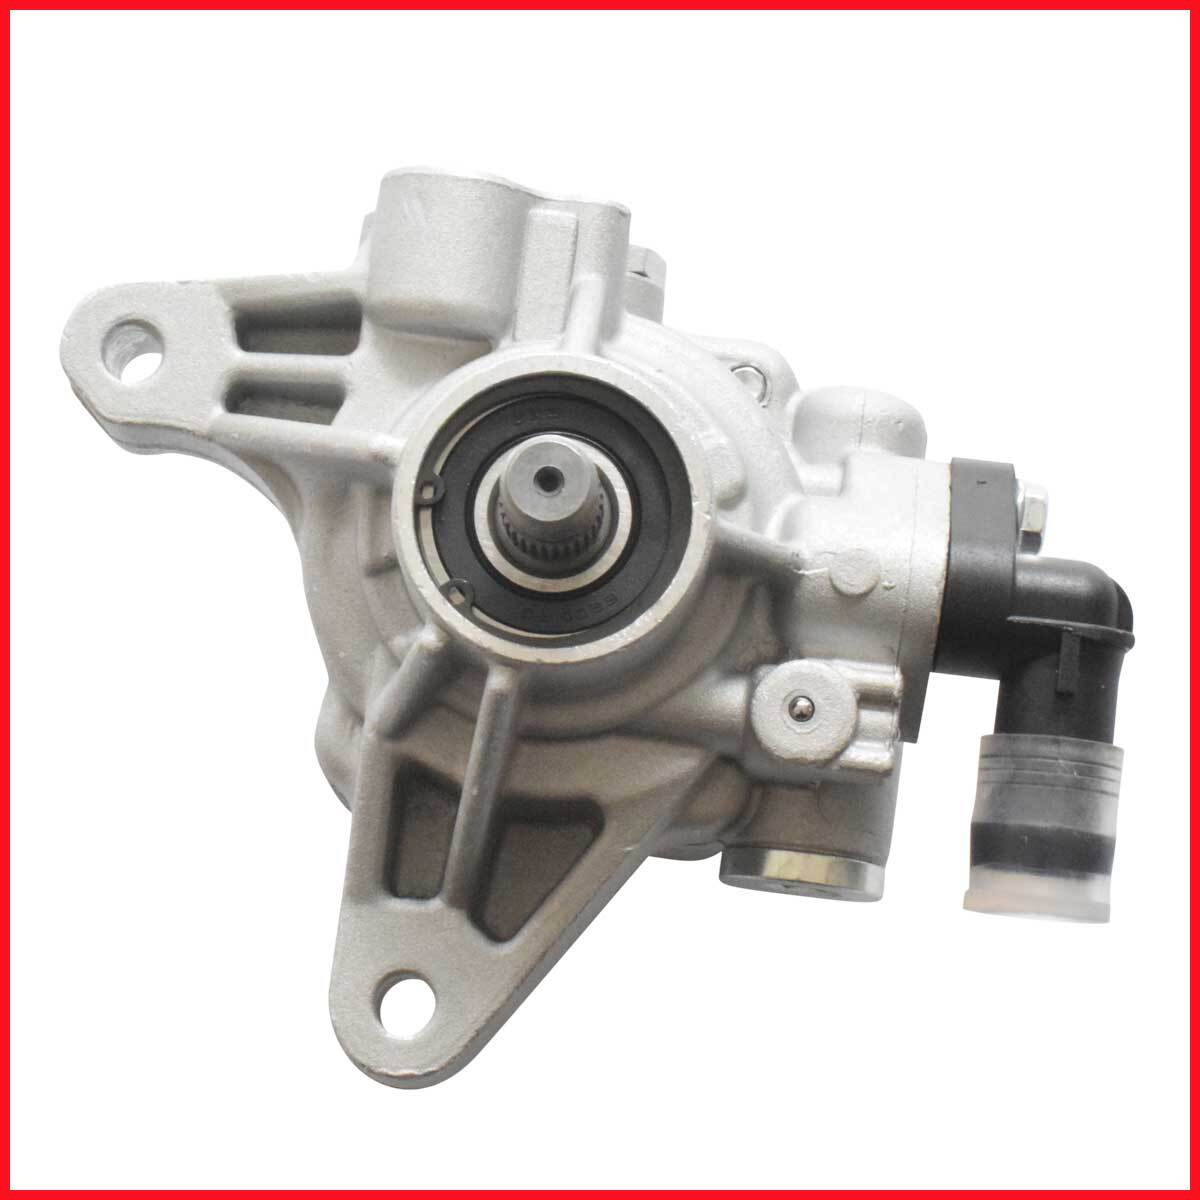 Power Steering Pump Fit For Honda CR-V Accord Euro 03-05 CM CL 03-07 Acura RSX TSX 2002-2008 2.4L K24A